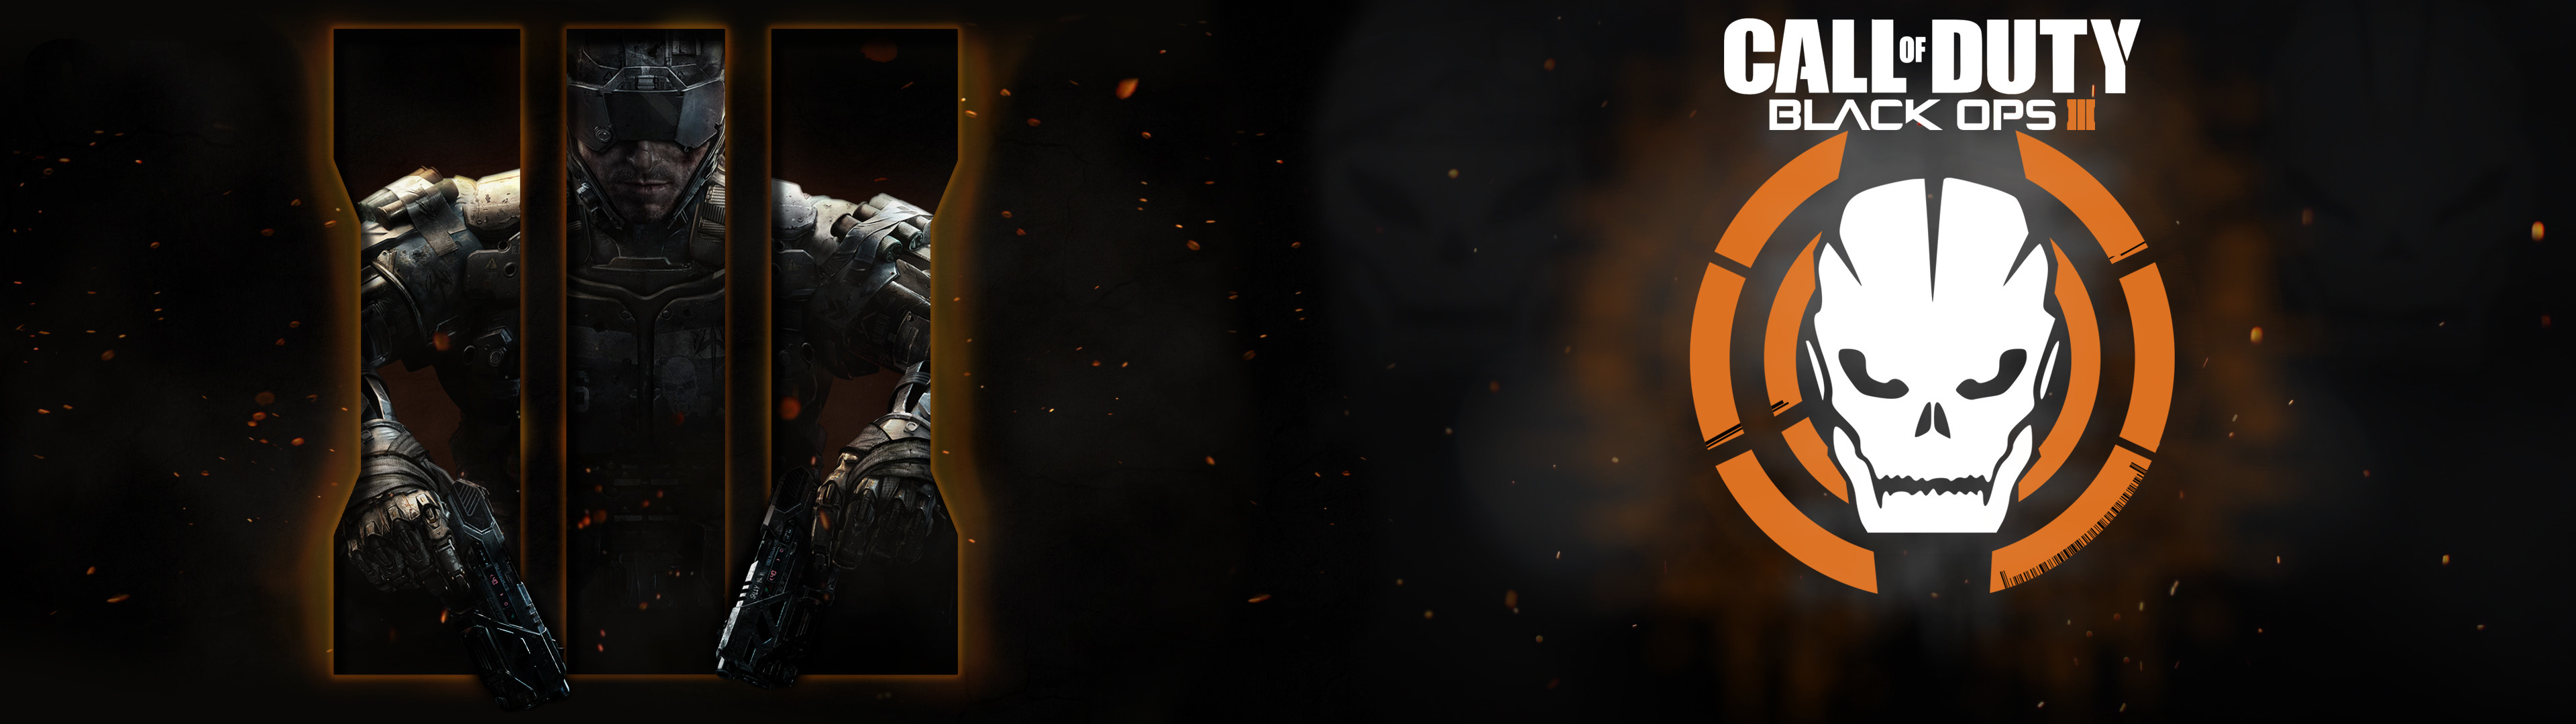 3840x1080 Toby-Affenbude 8 2 Call of Duty: Black Ops 3 Dual Wallpaper 05 by  Toby-Affenbude